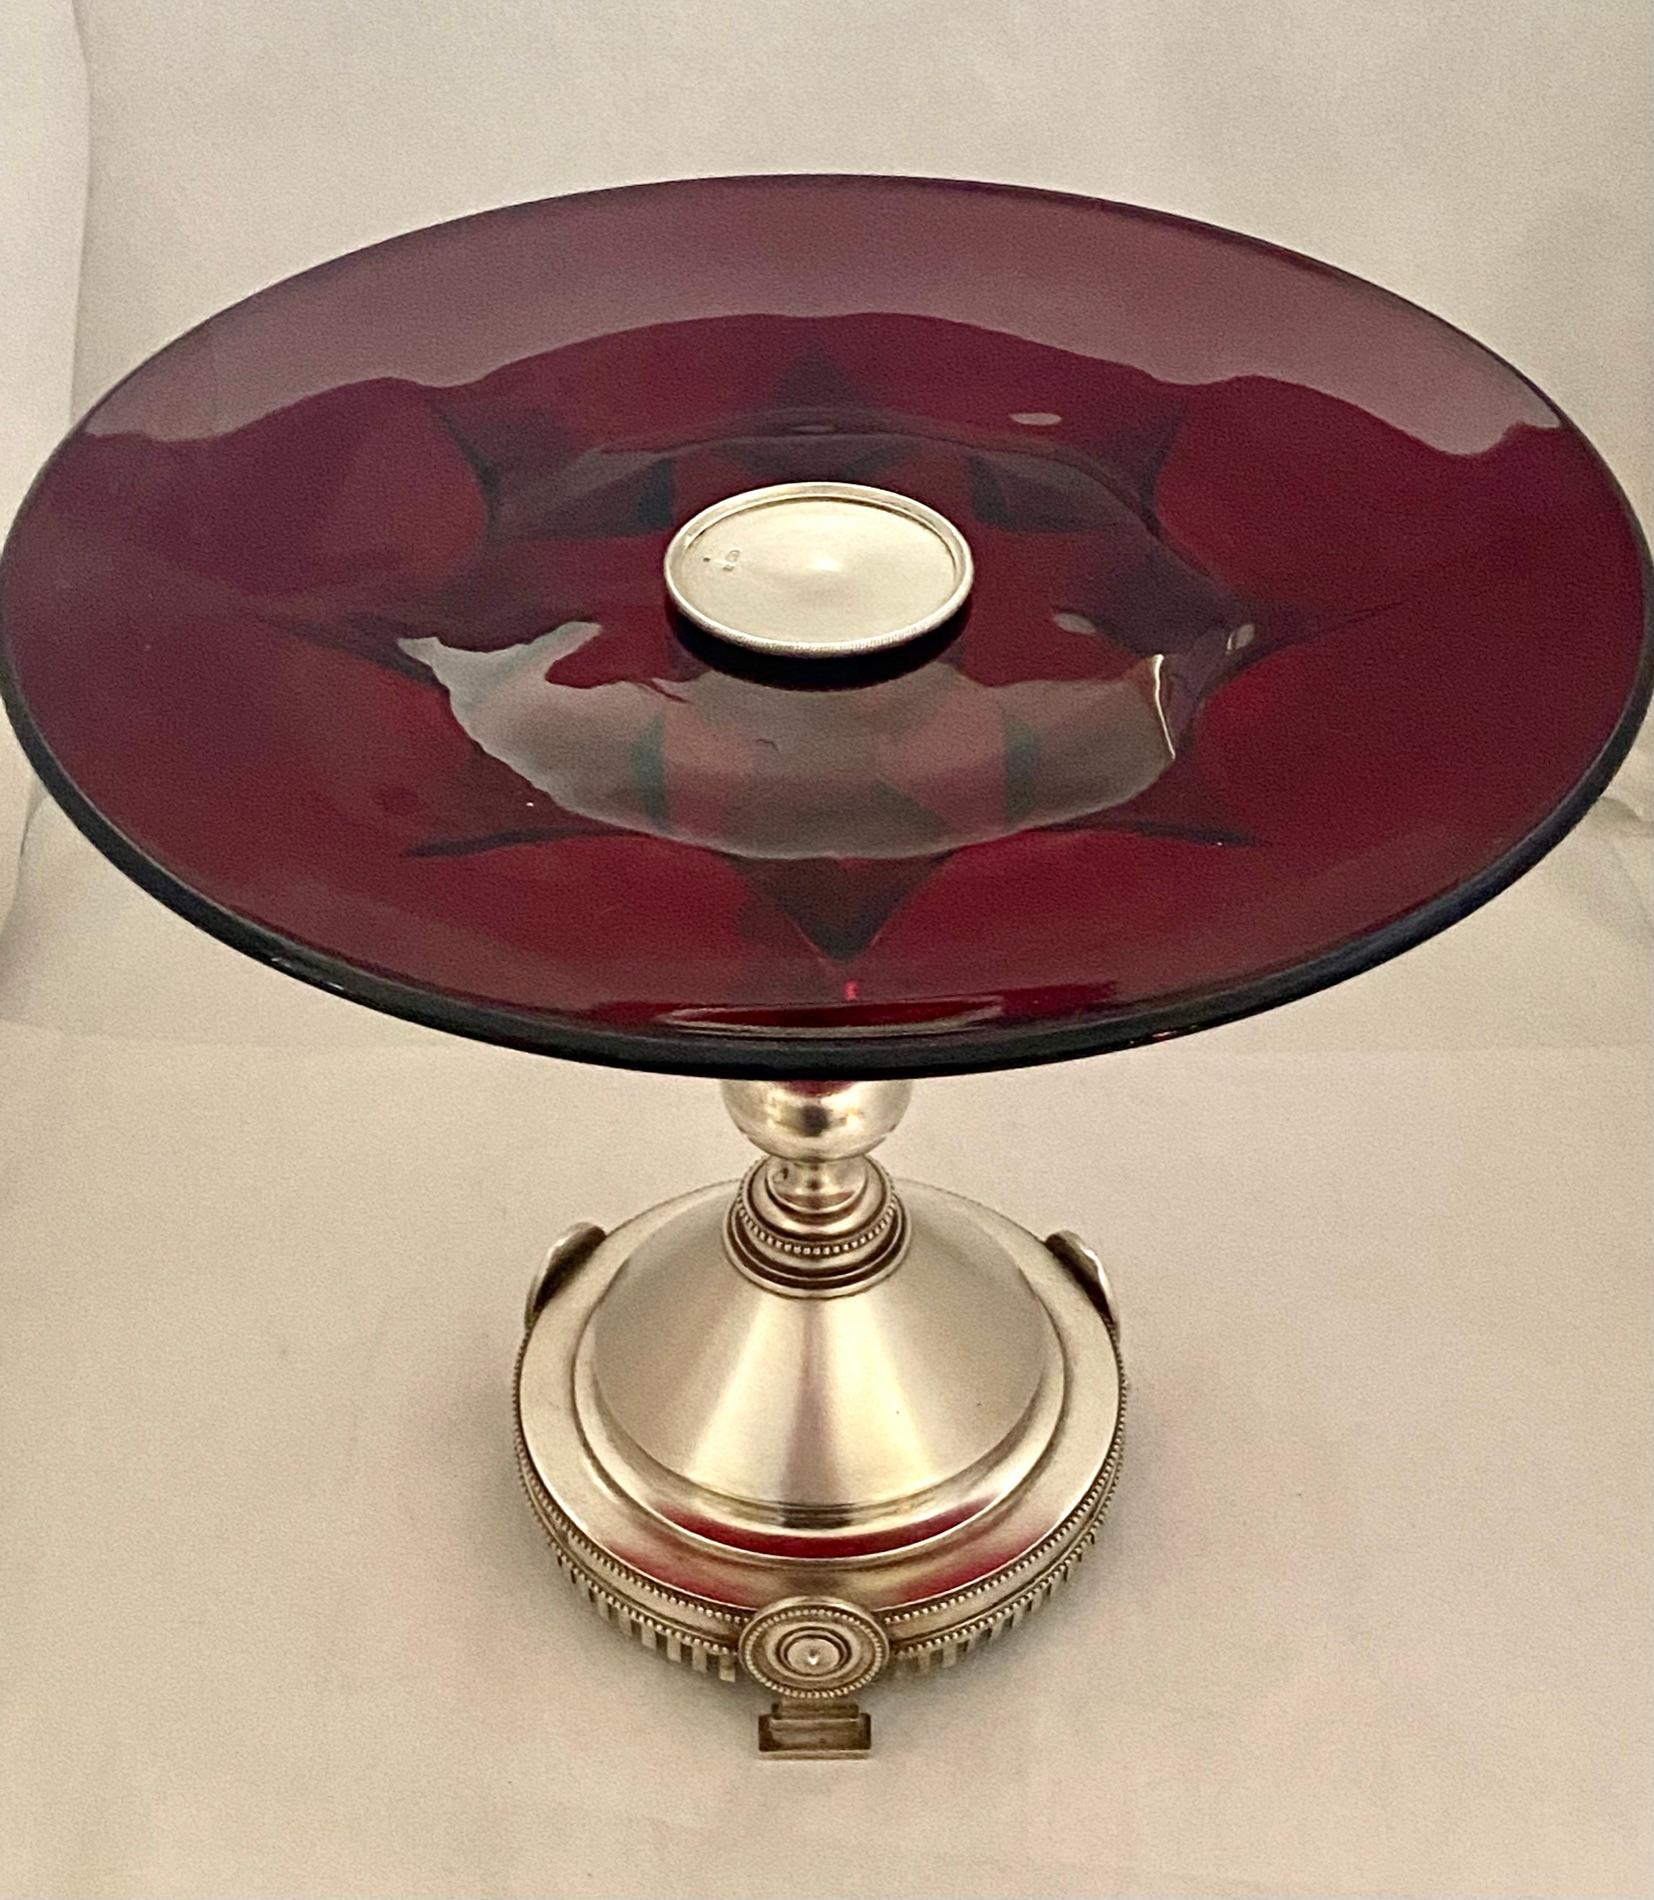 An 875/000 silver (84 Zolotniks) table centerpiece consisting of a silver base and stem with a round red glass bowl.
Height of the center piece: 24.5 cm. diameter of the red glass: 28 cm. diameter of the silver base: 13 cm. Weight of the silver base